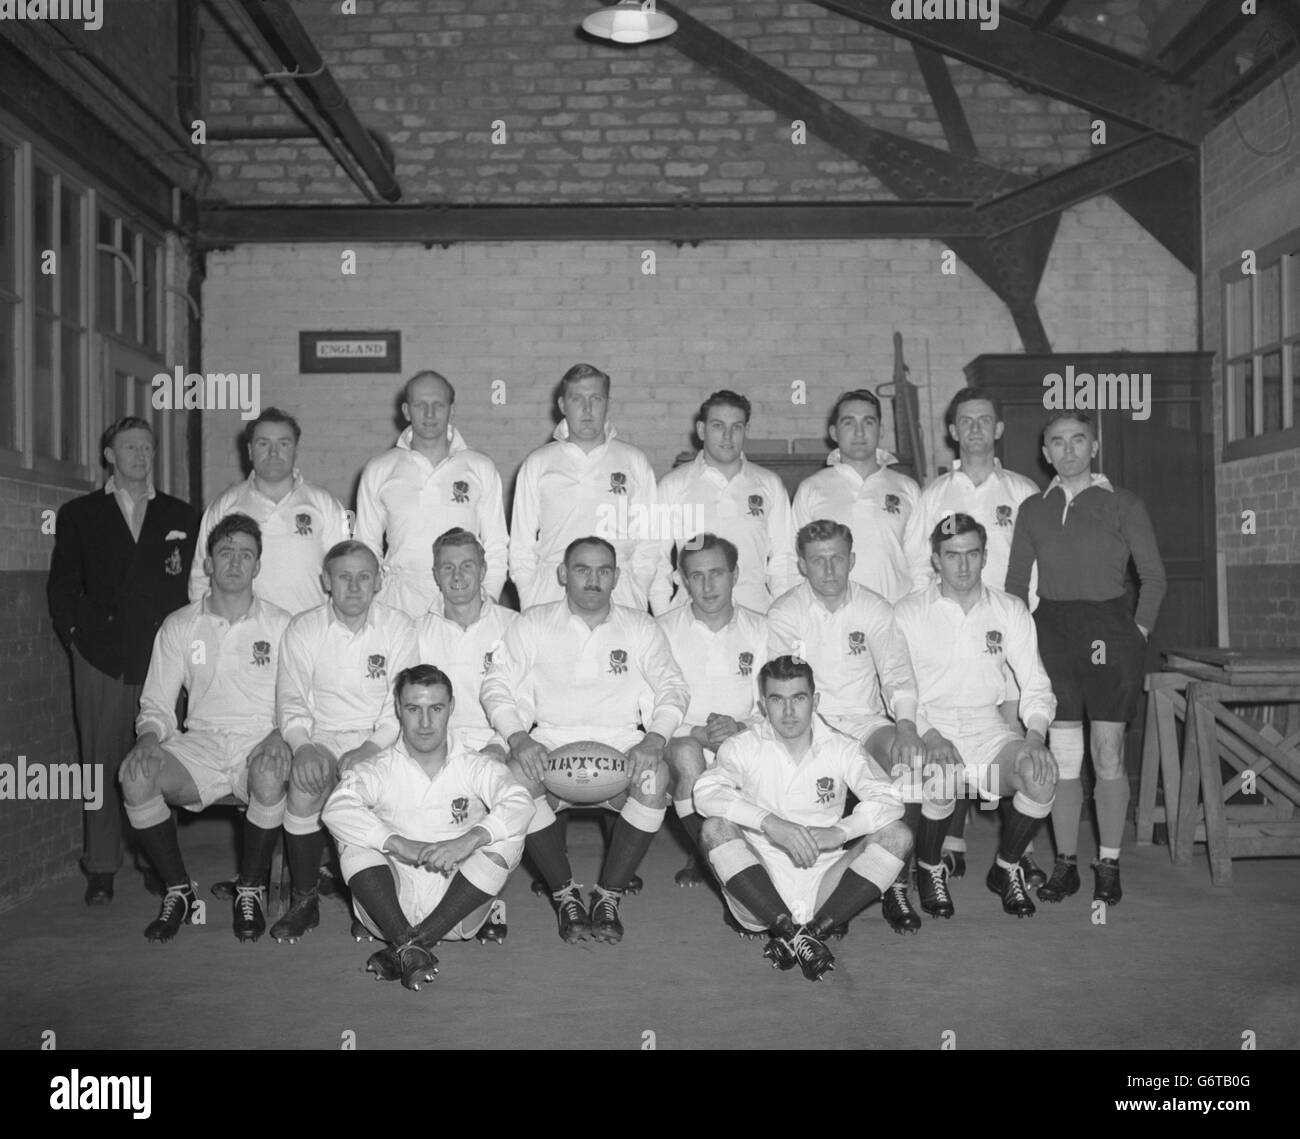 England team group. (l-r) Touch Judge, Sandy Sanders, unknown, unknown, unknown, unknown, Ian King. (Middle row l-r) Jeff Butterfield, Christophe Winn, Eric Evans, Bob Stirling, John Carpenter, Ted Woodward, unknown. Sitting (l-r) Unknown and Martin Regan. Stock Photo